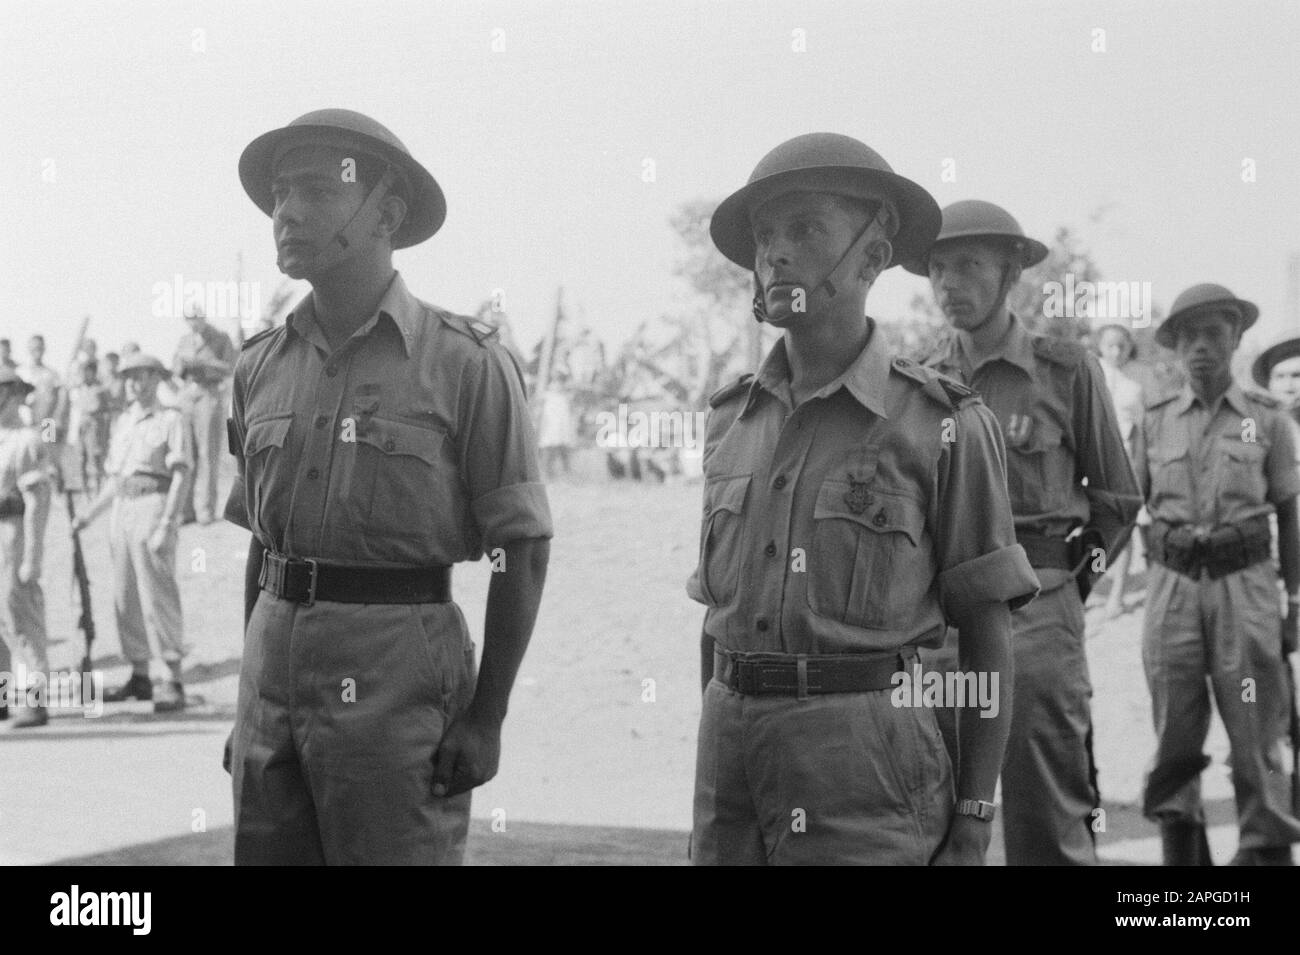 Award Sergeant J. Muller and Corporal M.J.B. Baggerman at Bandoeng Description: Collection Photo Collection Service for Army Contacts Indonesia, photon number 265-2-4 Date: July 1947 Location: Bandung, Indonesia, Dutch East Indies Stock Photo